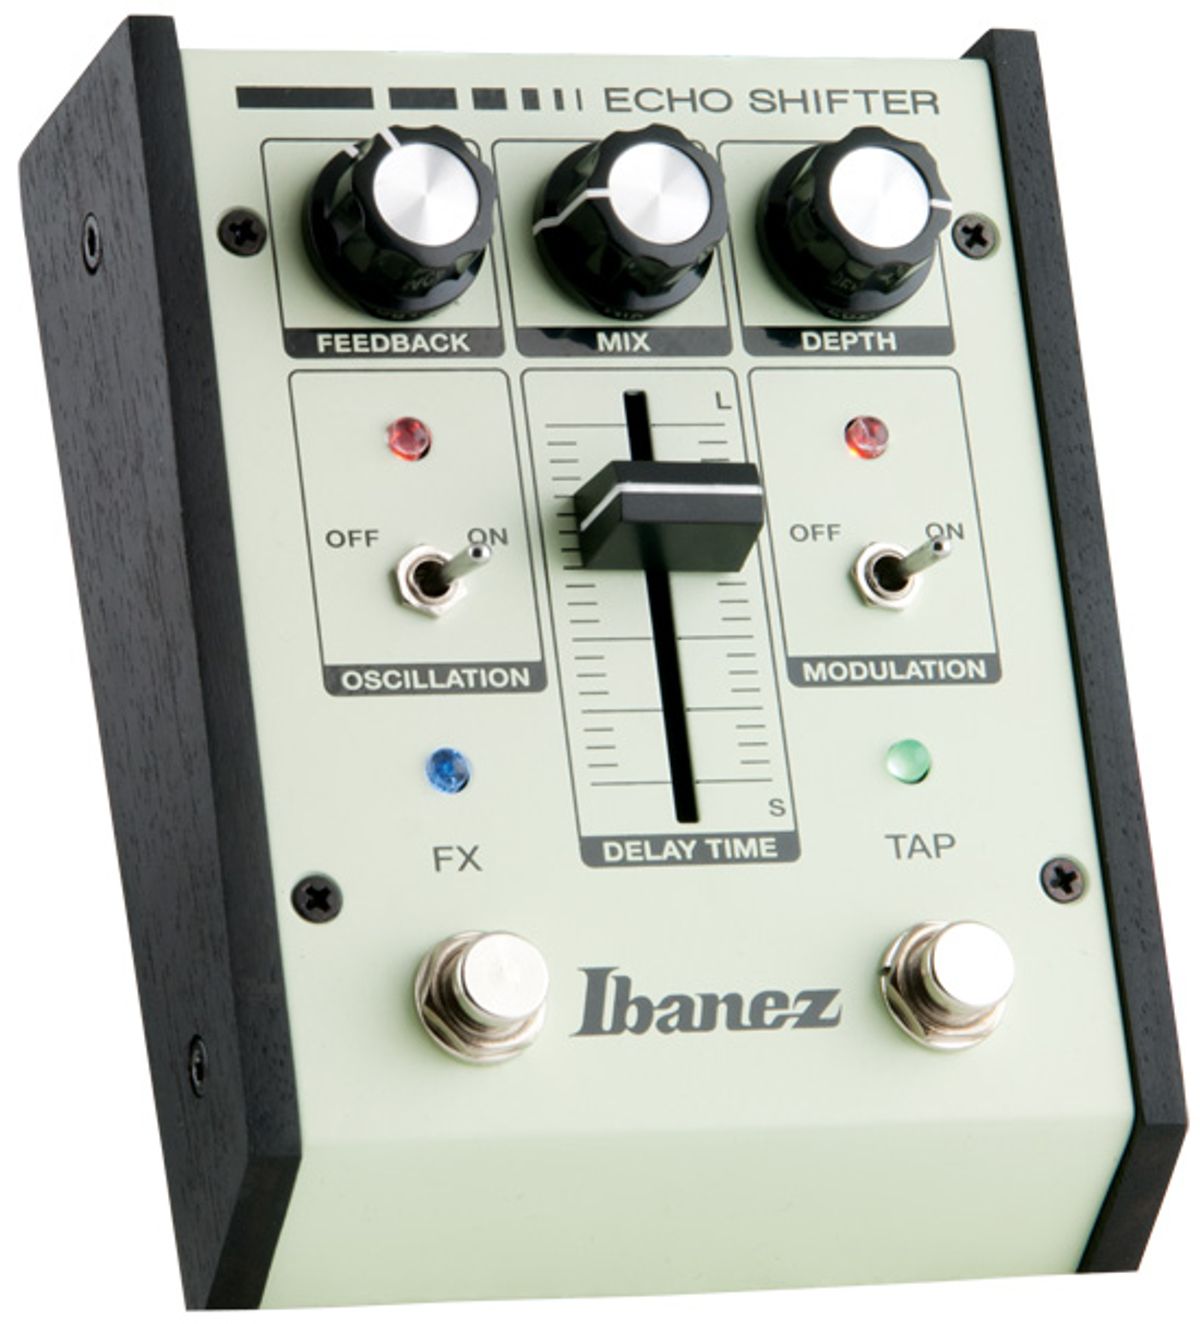 Ibanez Echo Shifter Pedal Review